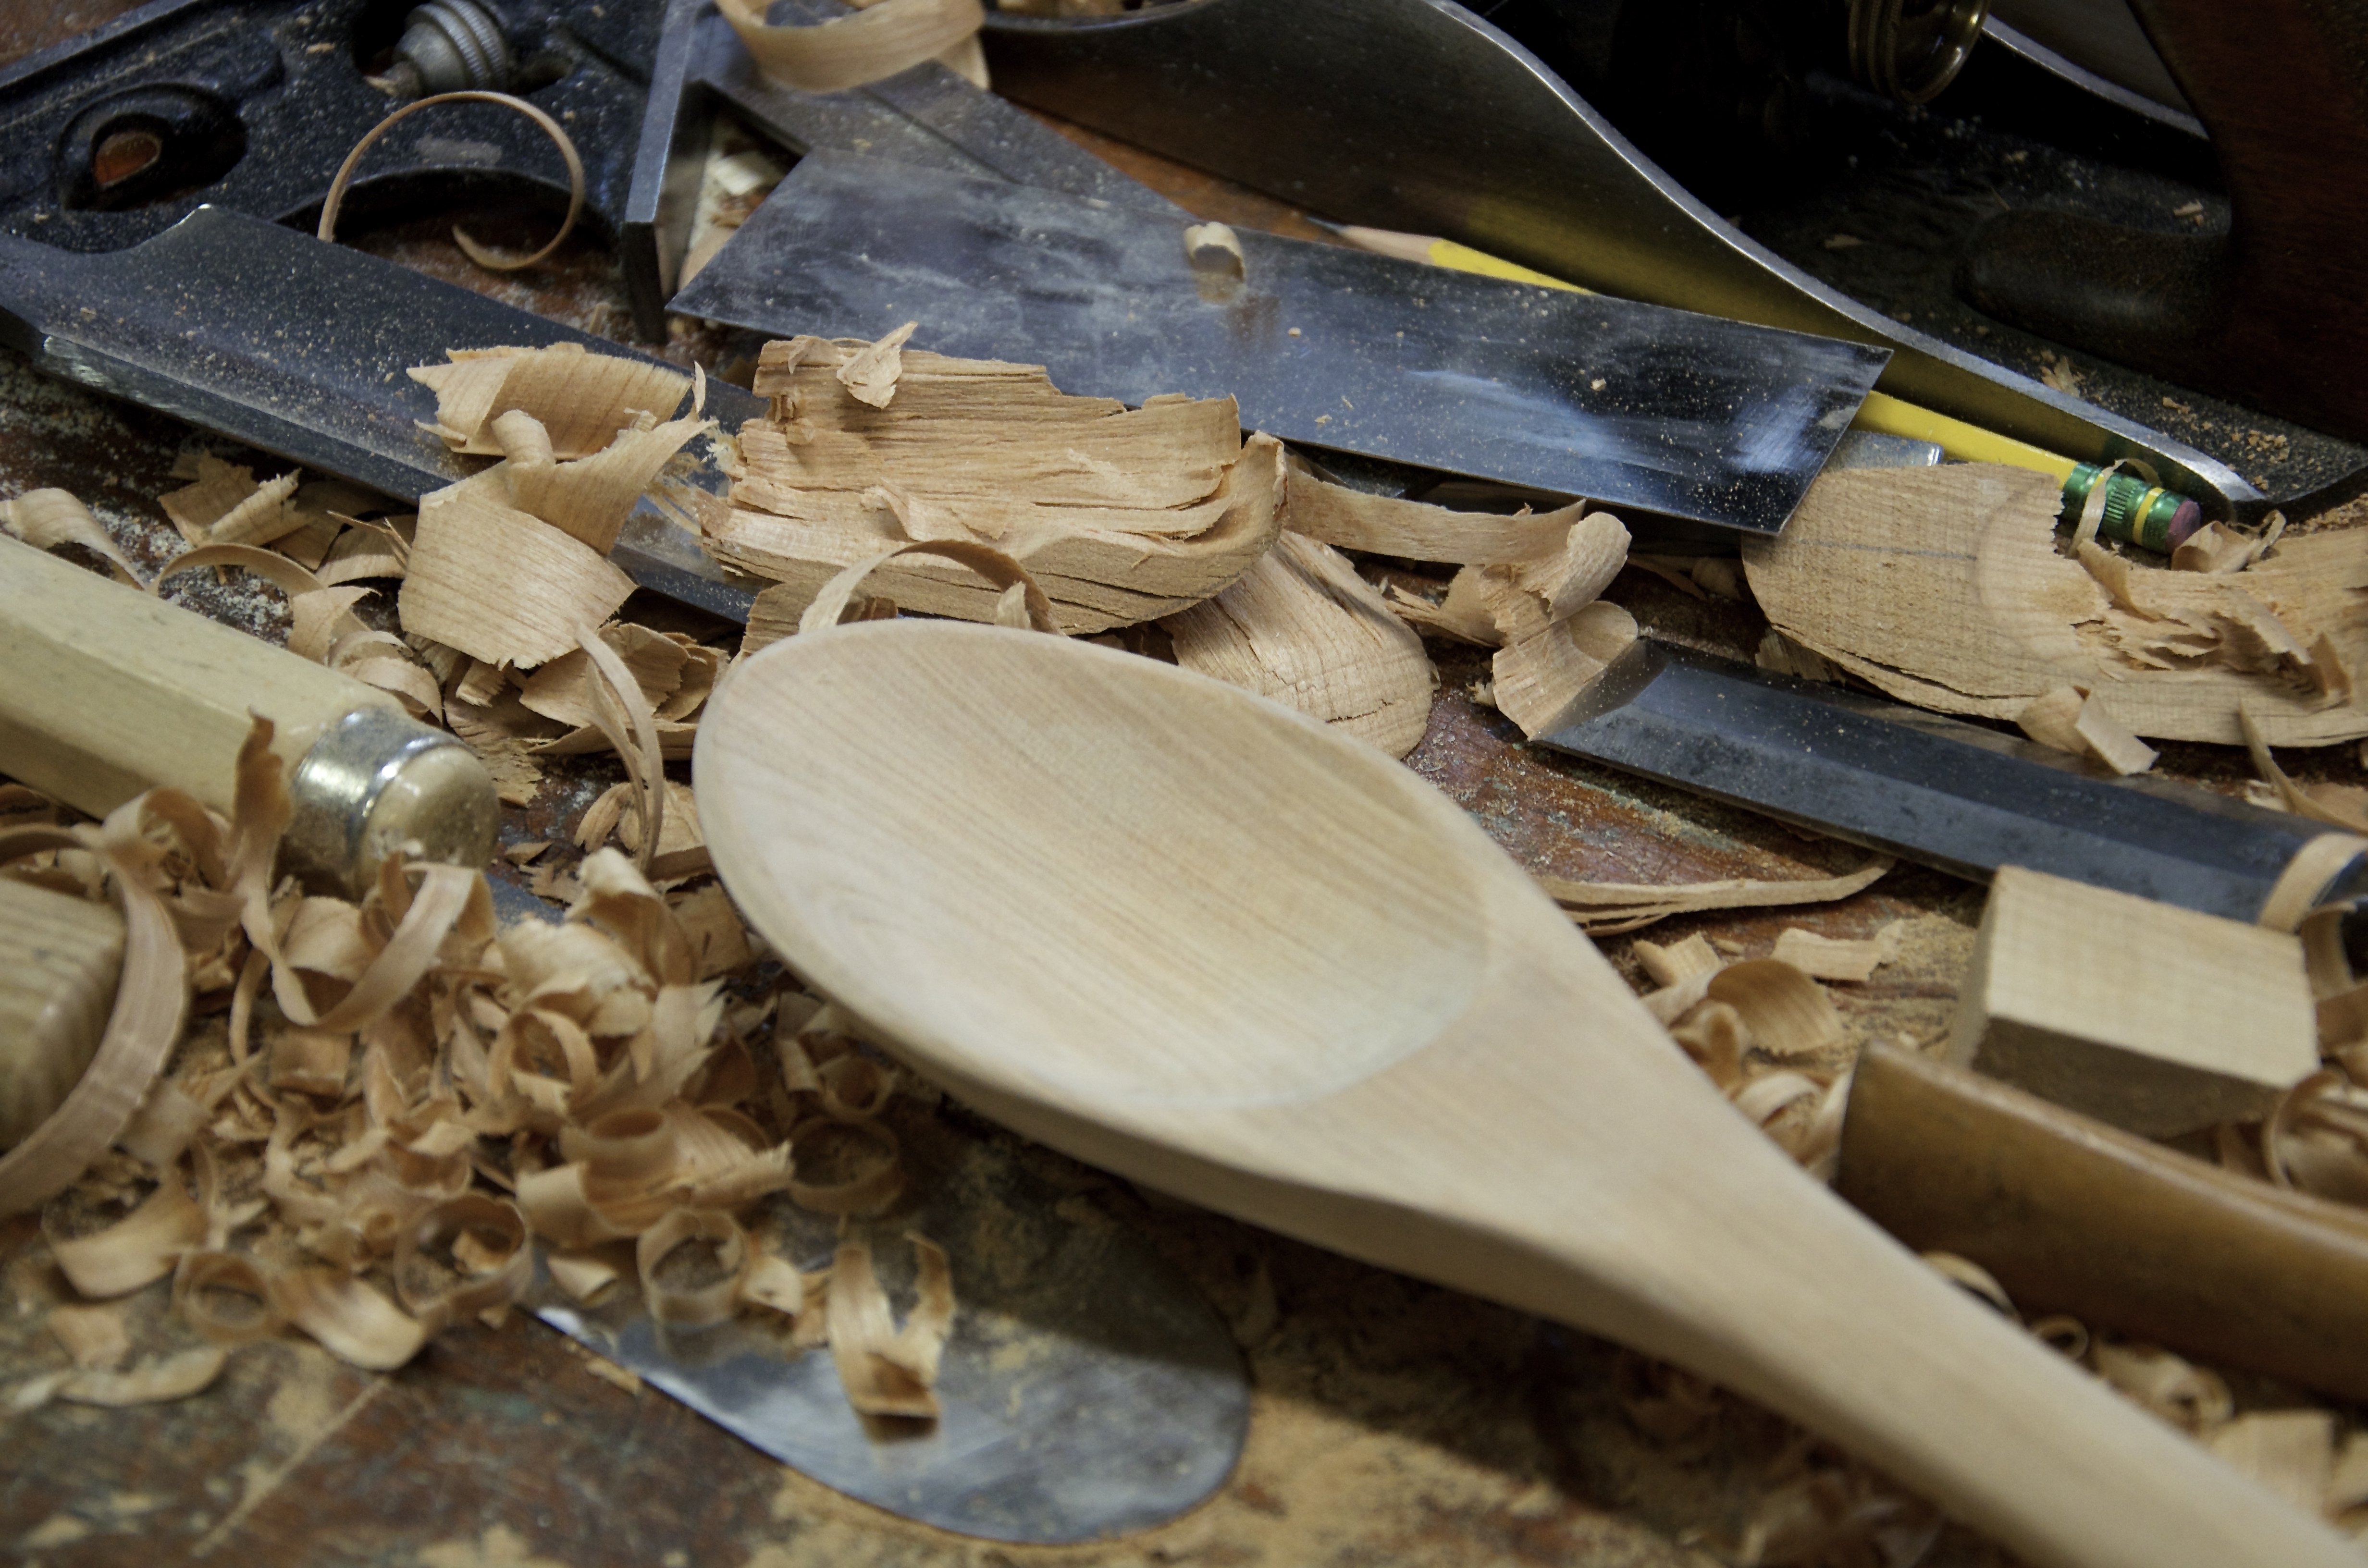 Spoon Carving: Tools, Techniques and Tips for Carving a Spoon 